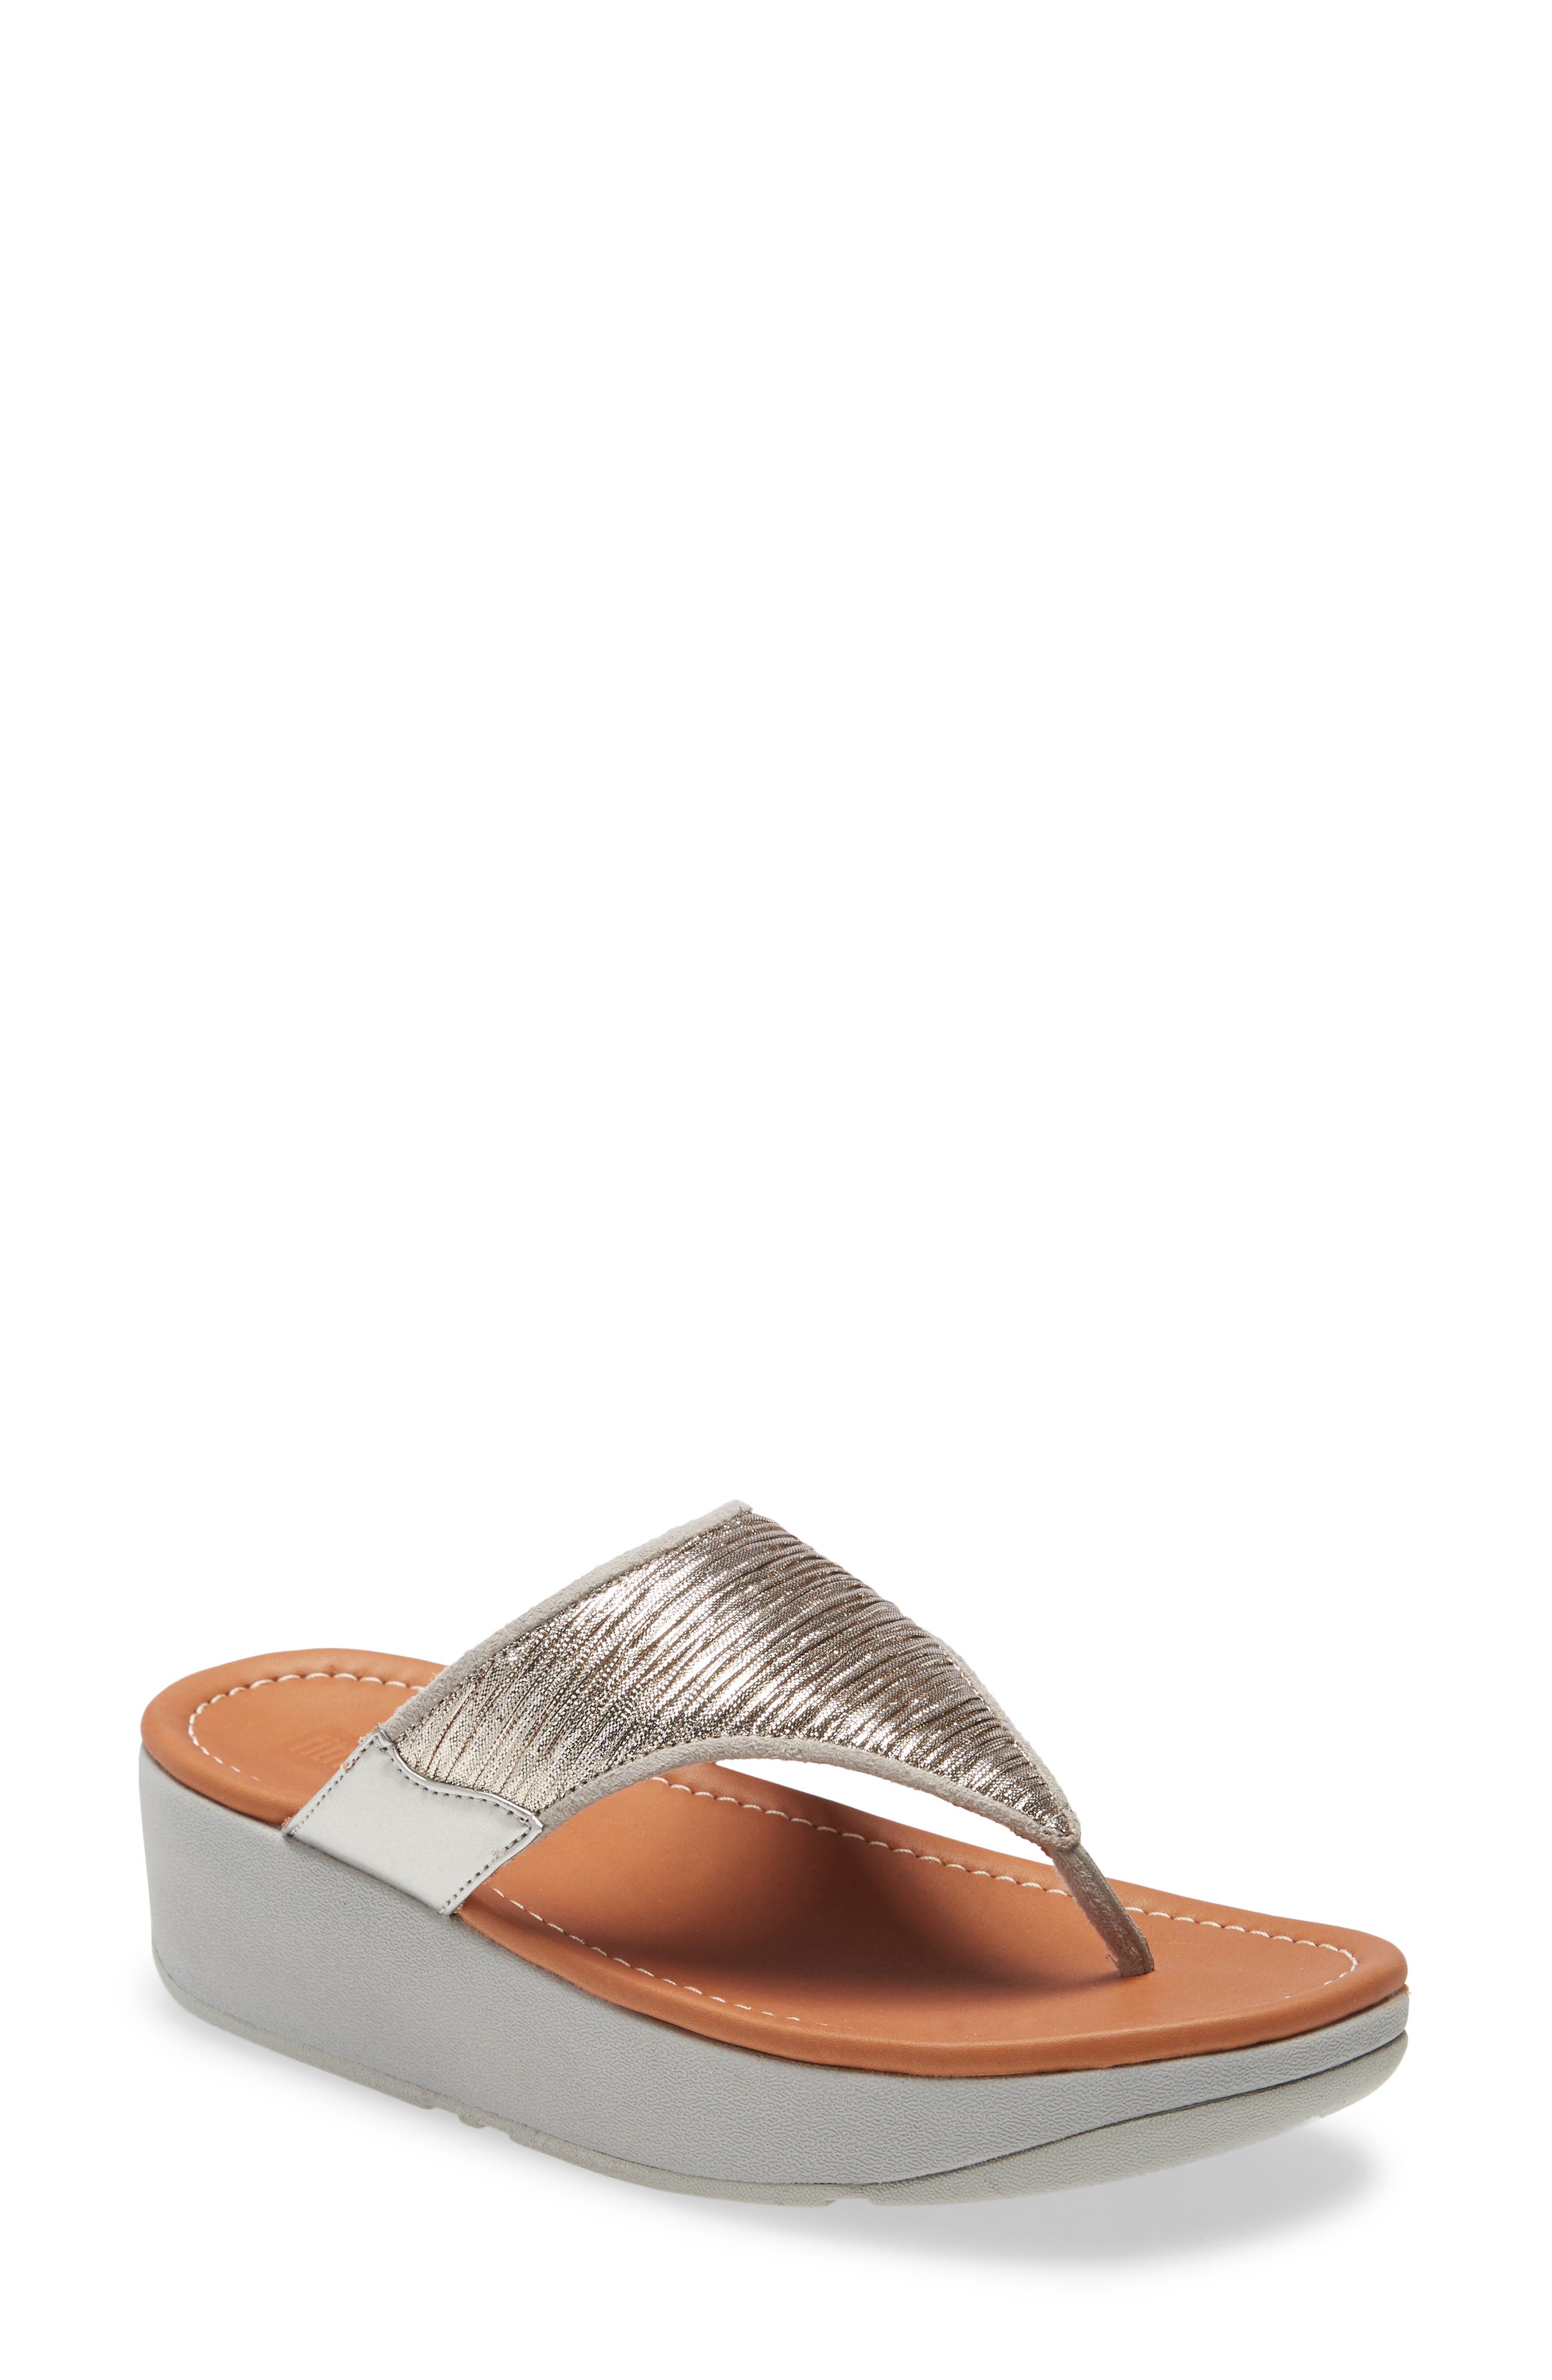 fitflop shoes nordstrom